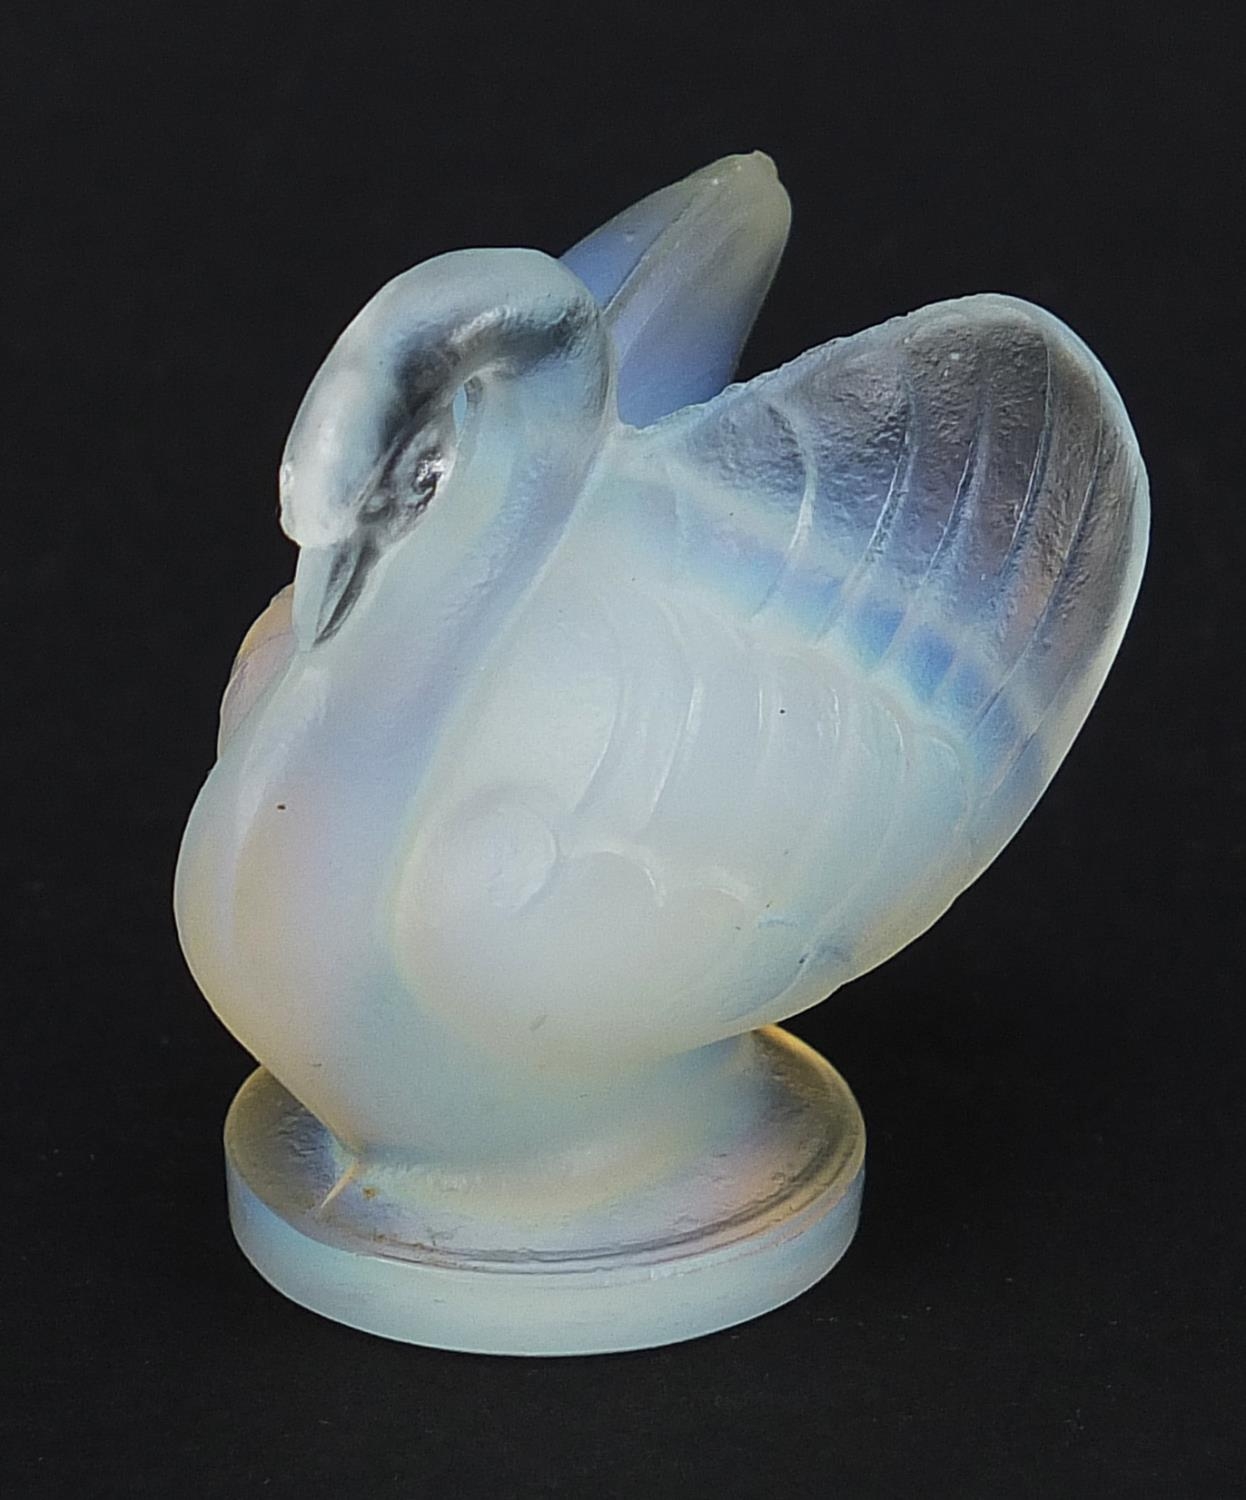 Sabino, French Art Deco opalescent swan paperweight, 4cm high